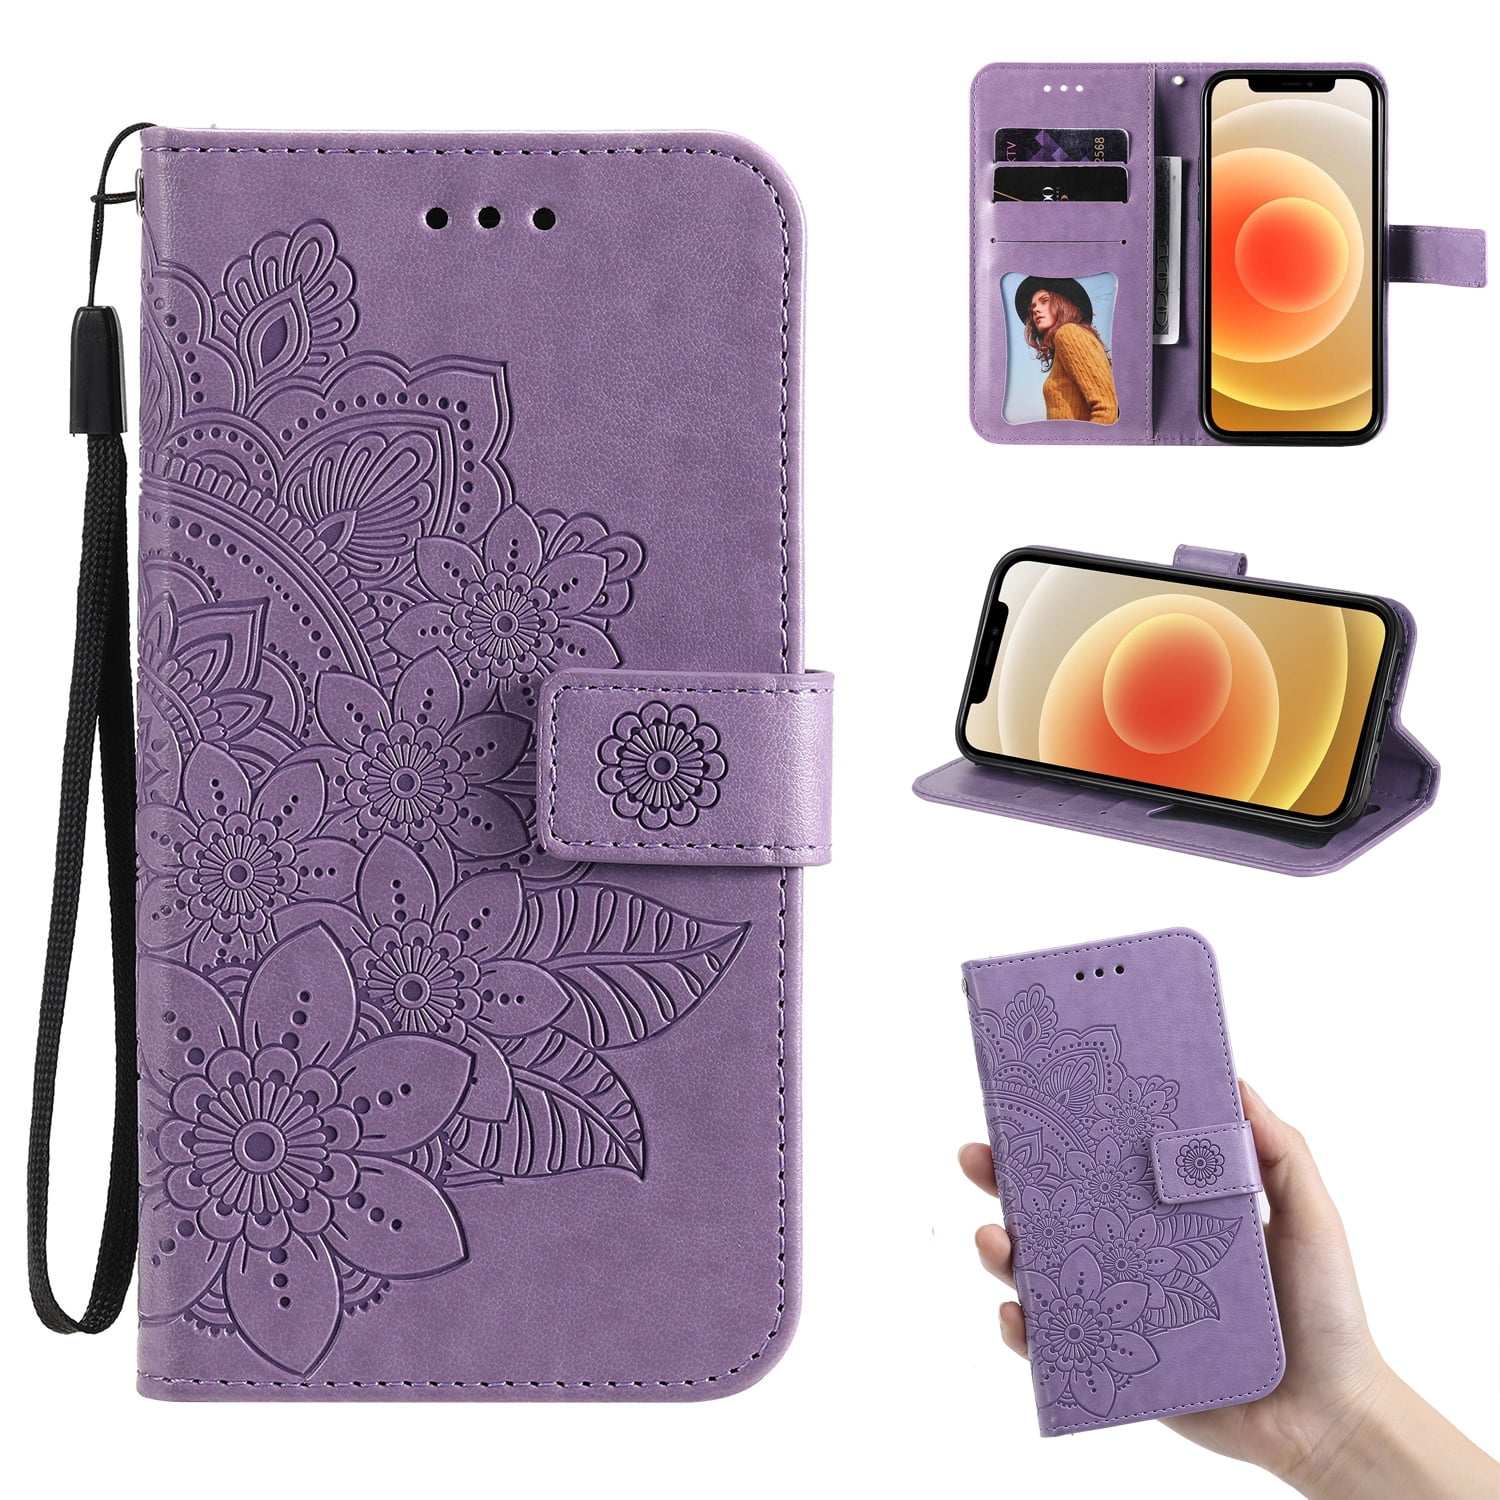 Embossed Magnetic Flip Wallet PU Stand Strap Case Cover For iPhone Android Phone 